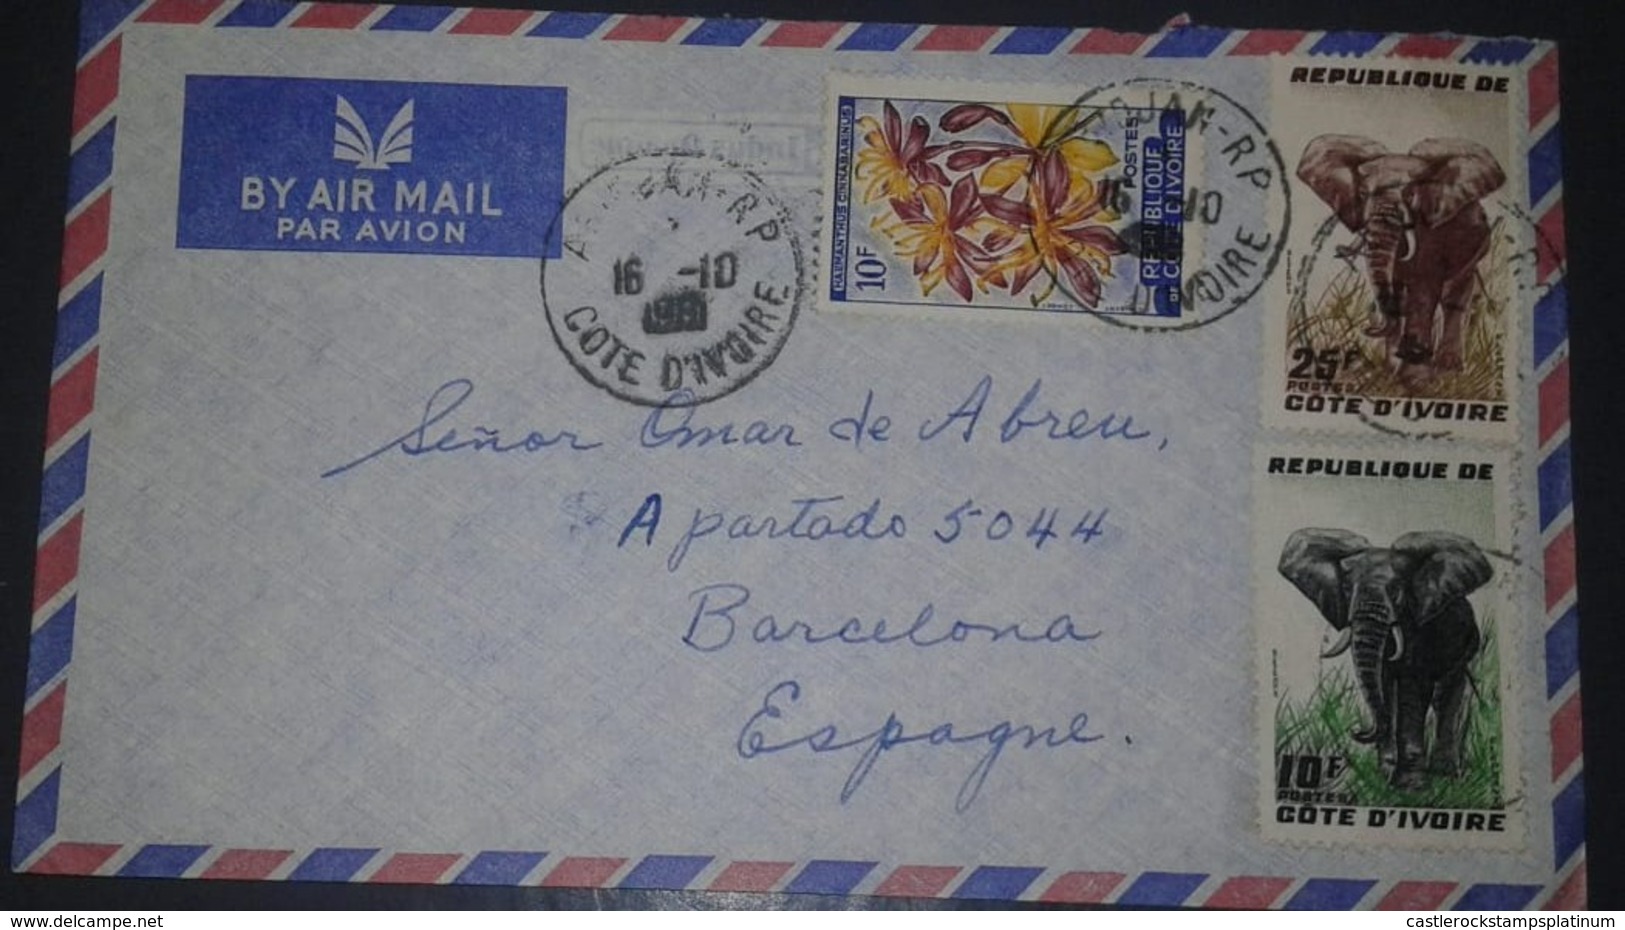 L) 1989 IVORY COAST, ELEPHANT, 25F, BROWN, 10F, FLOWERS, NATURE, AIRMAIL, CIRCULATED COVER FROM IVORY COAST TO SPAIN - Ivory Coast (1960-...)